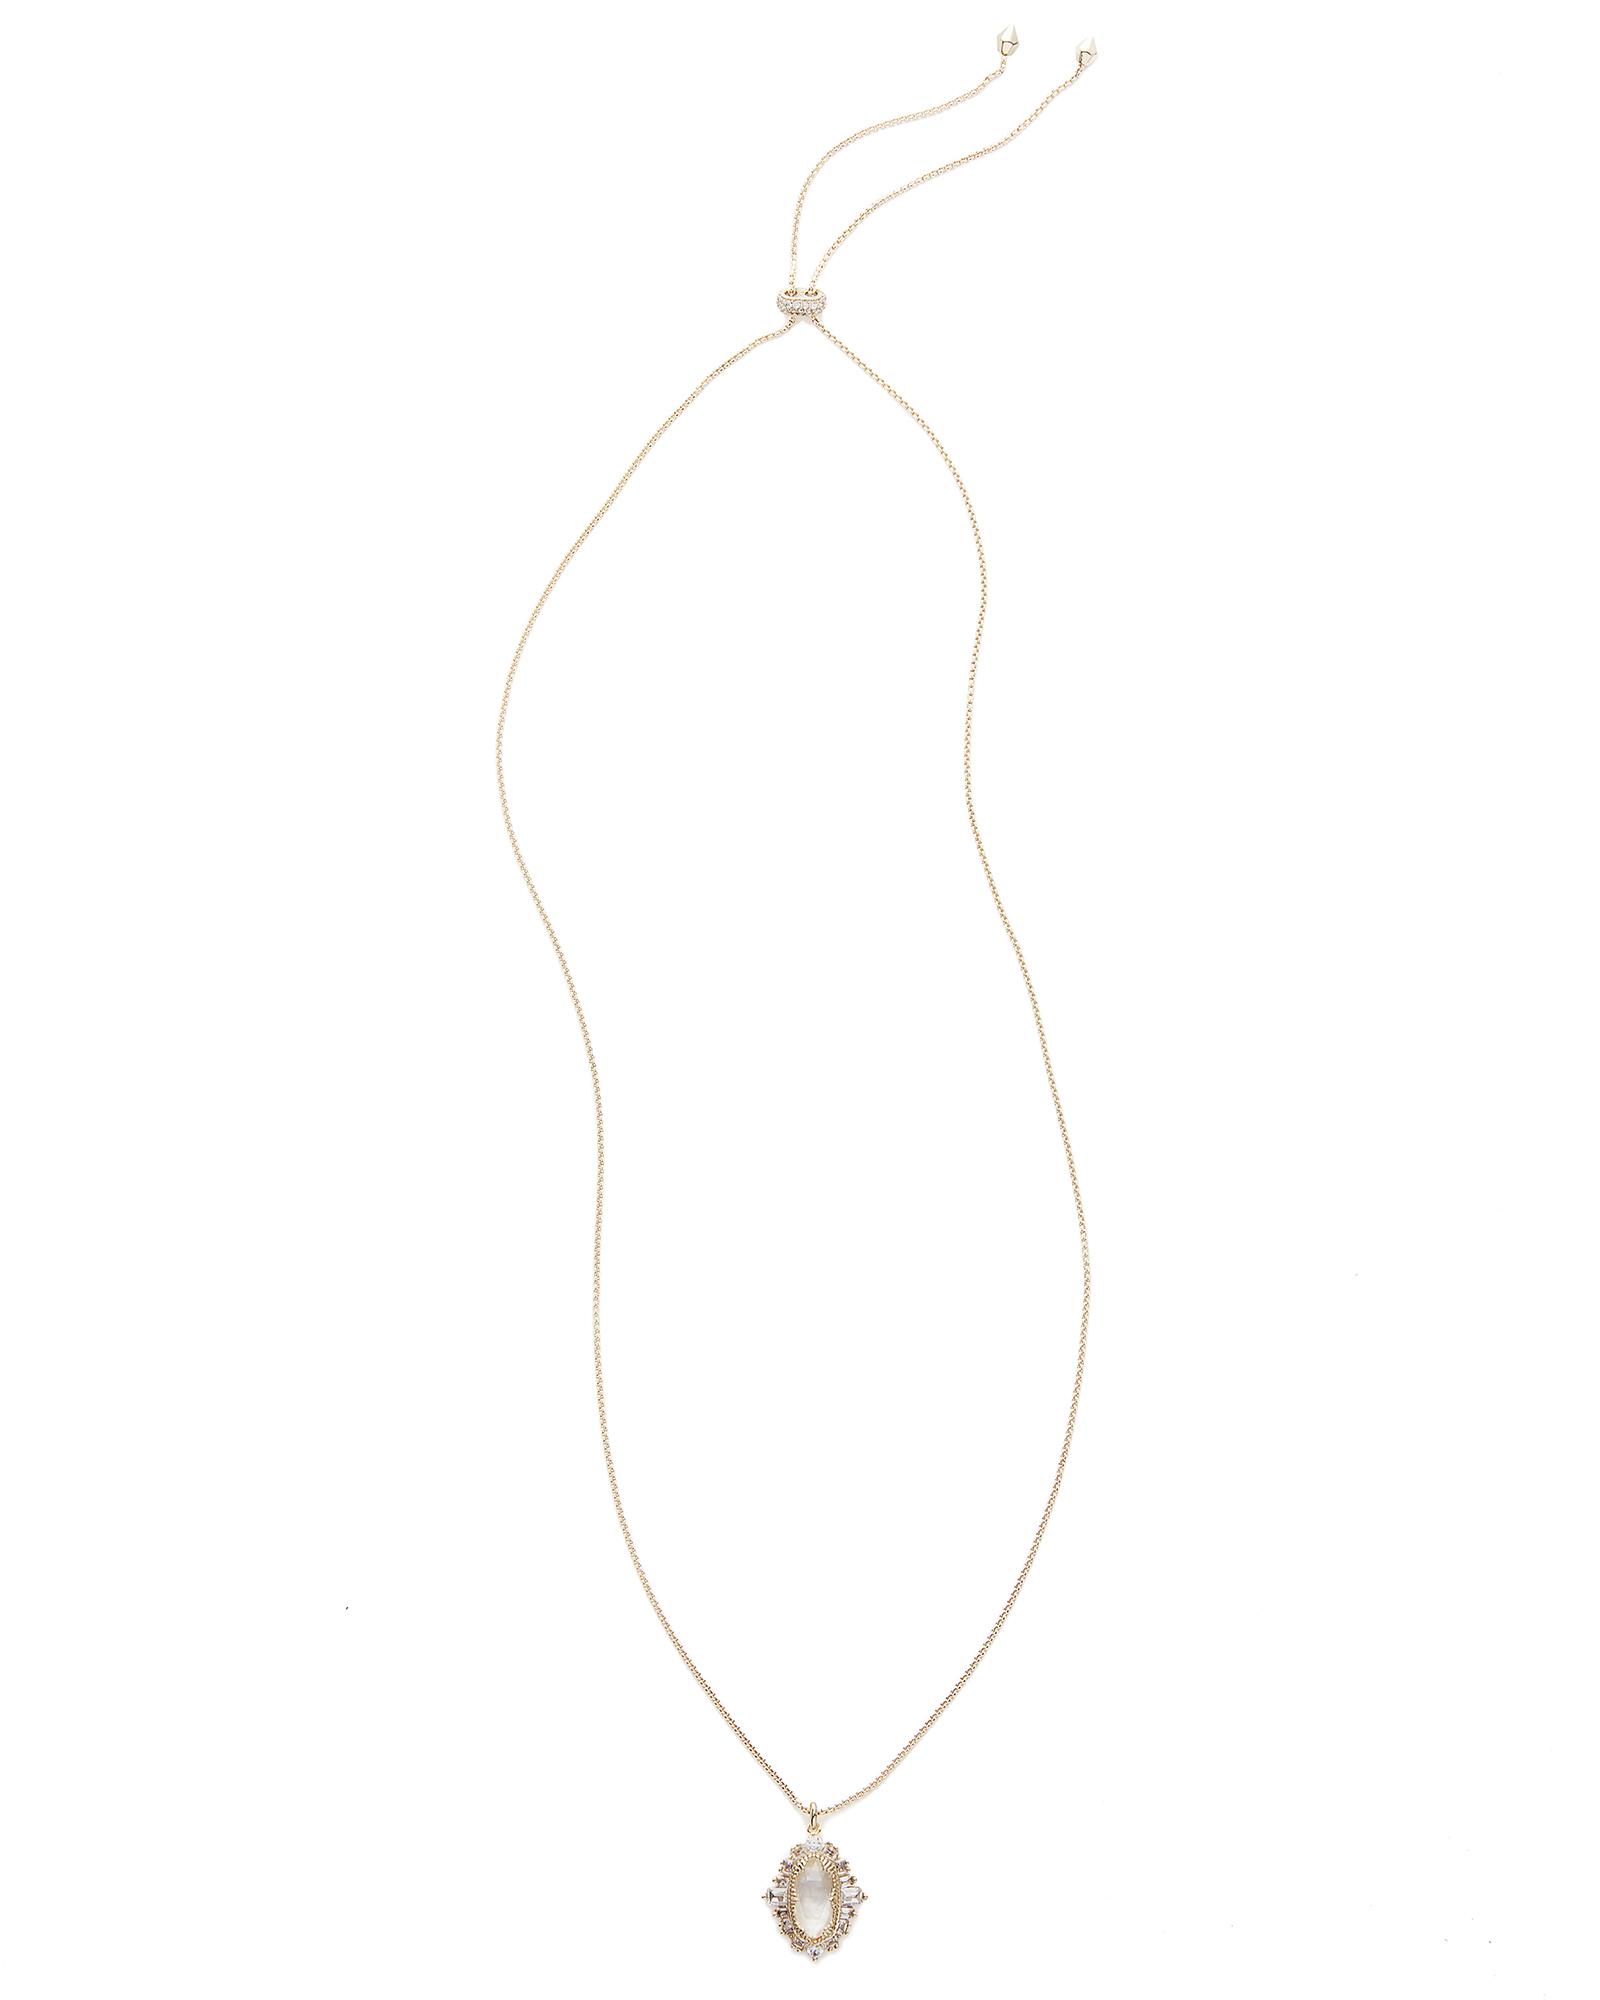 Kay Pendant Necklace in Mother-of-Pearl | Kendra Scott